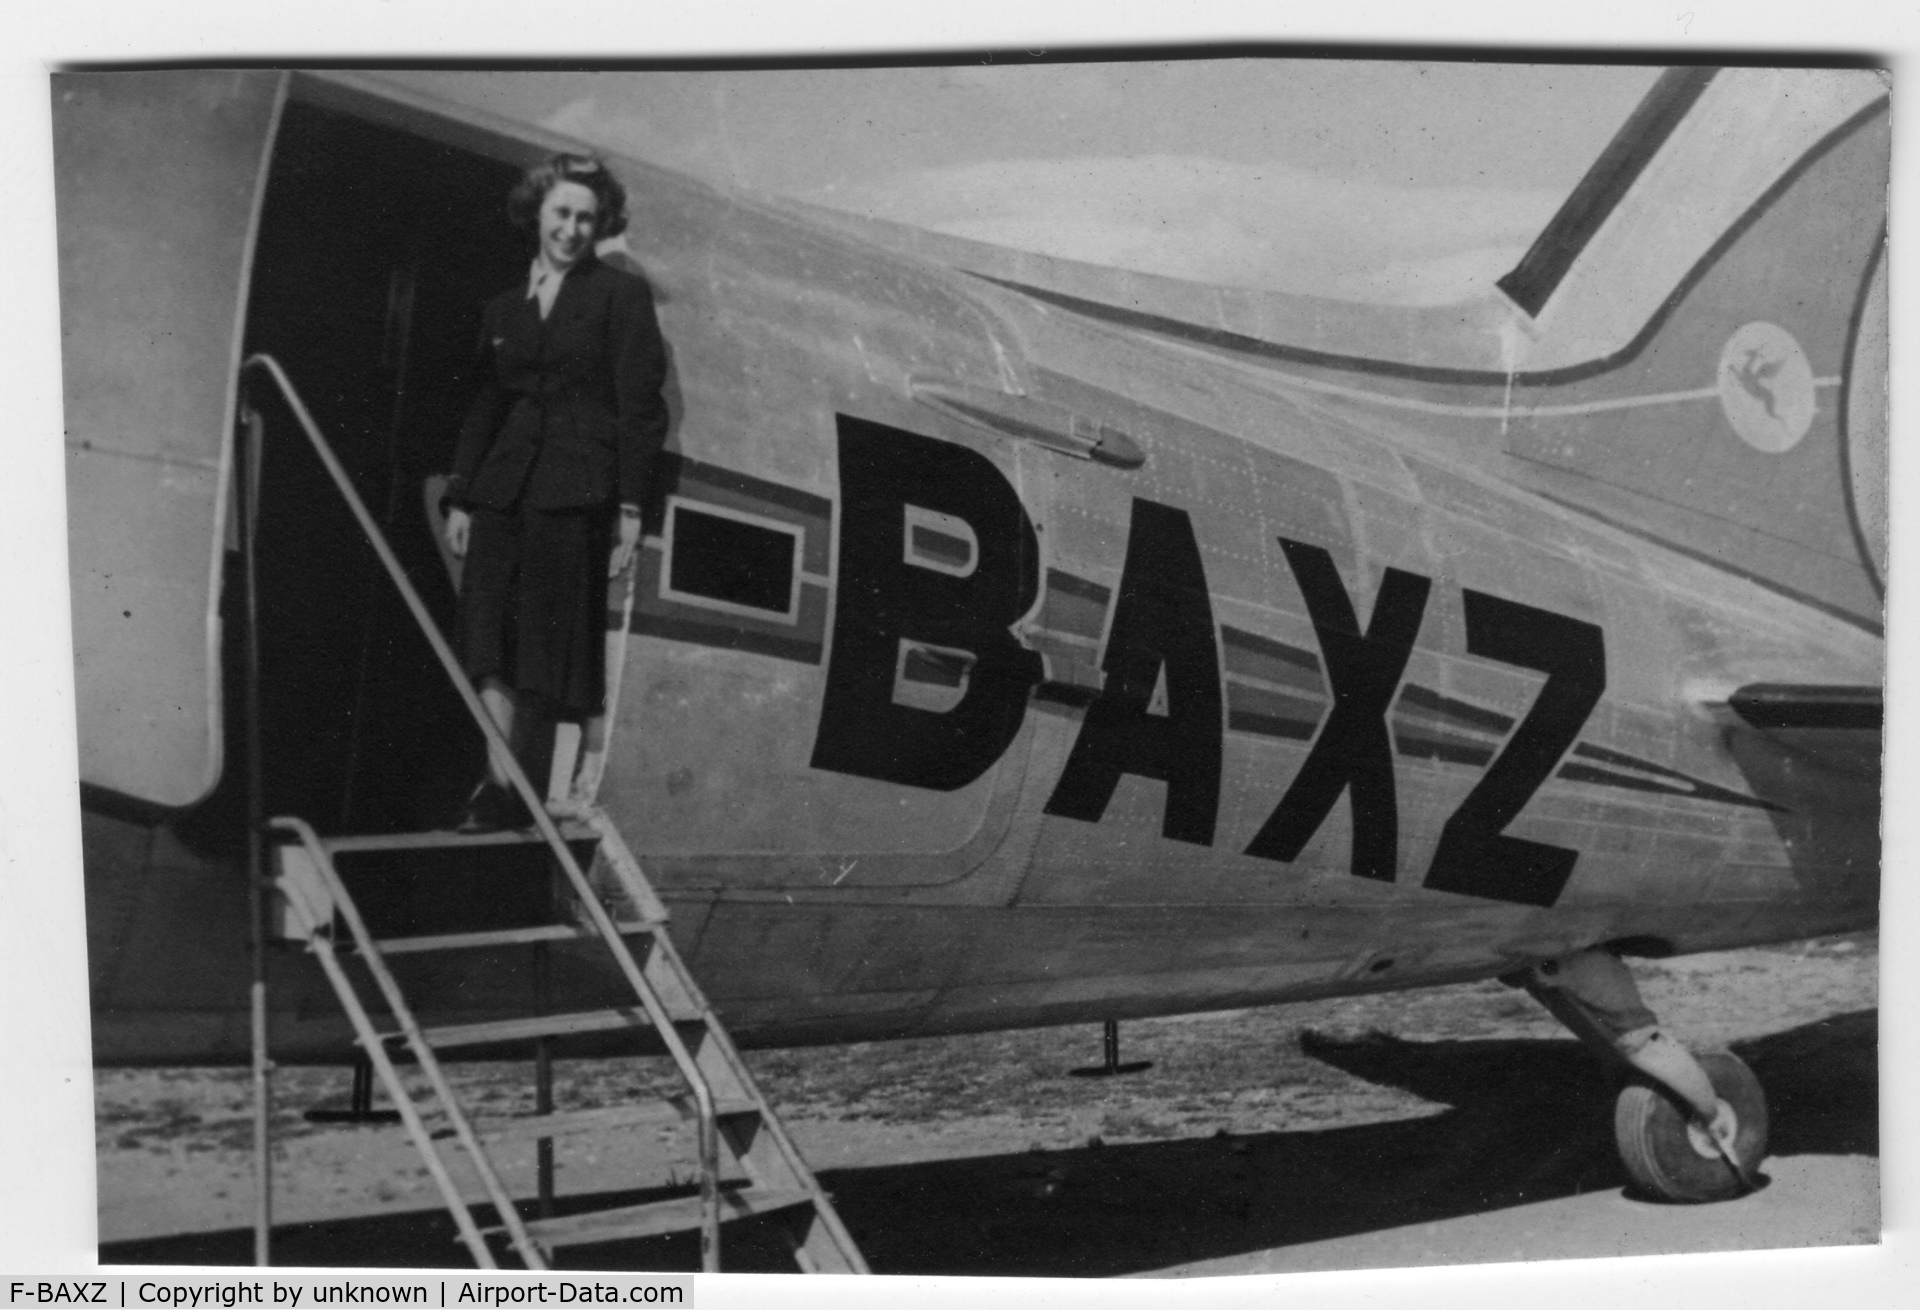 F-BAXZ, 1944 Douglas C-47B Skytrain C/N 16488, In the effects of the late Jeannine Krawzow, nee Bion. Probably taken 1945-1947 while in French army / UN displaced persons service.